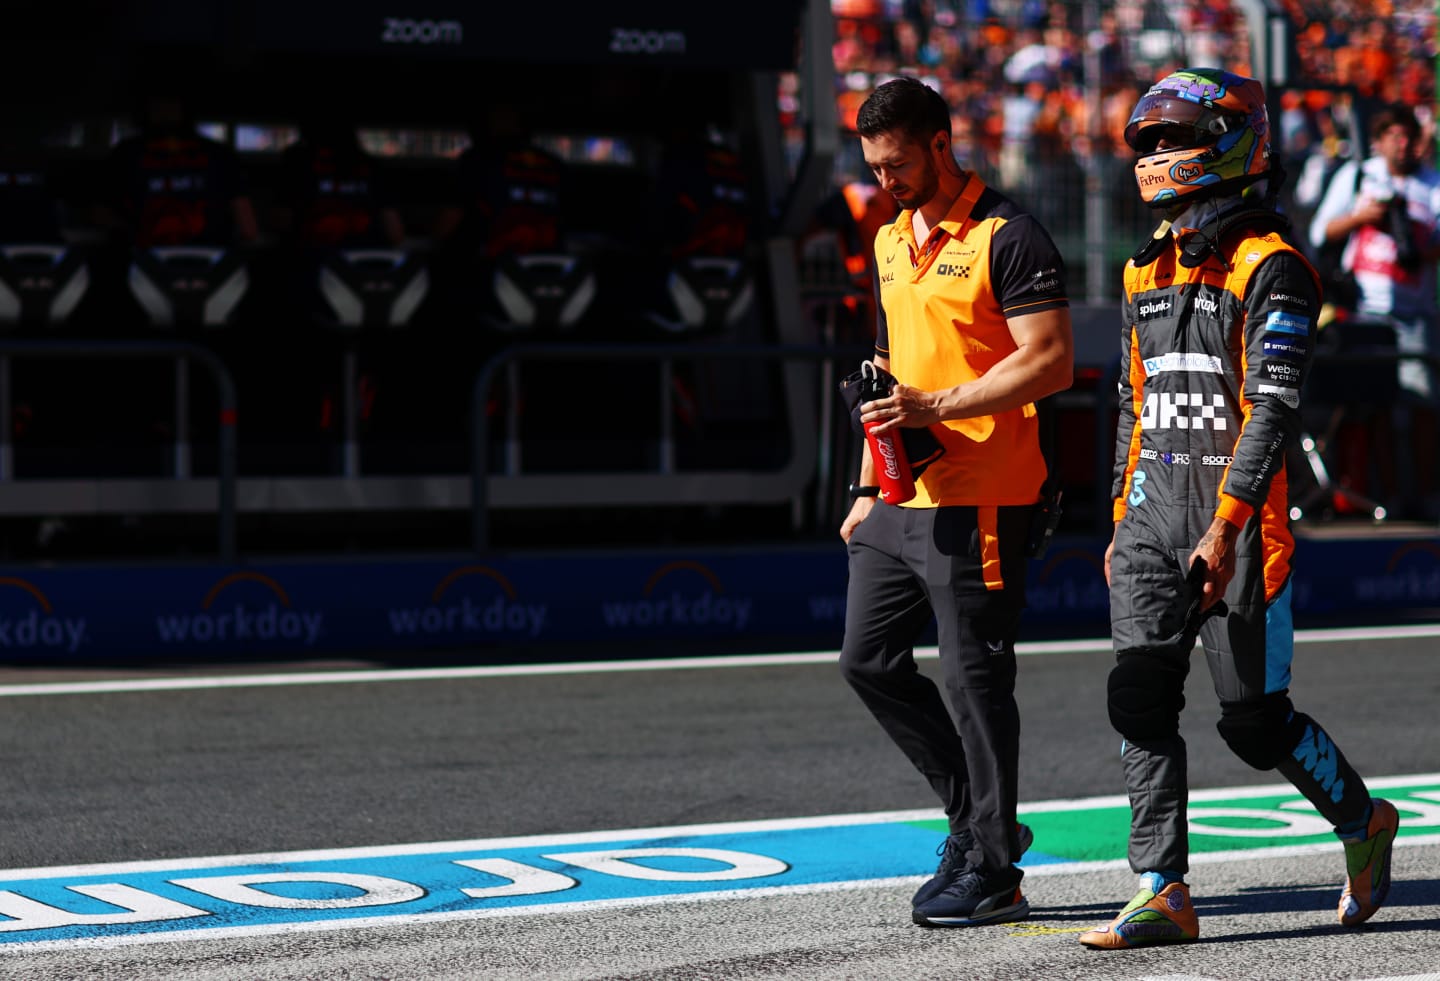 ZANDVOORT, NETHERLANDS - SEPTEMBER 03: 17th placed qualifier Daniel Ricciardo of Australia and McLaren walks in the Pitlane during qualifying ahead of the F1 Grand Prix of The Netherlands at Circuit Zandvoort on September 03, 2022 in Zandvoort, Netherlands. (Photo by Mark Thompson/Getty Images)